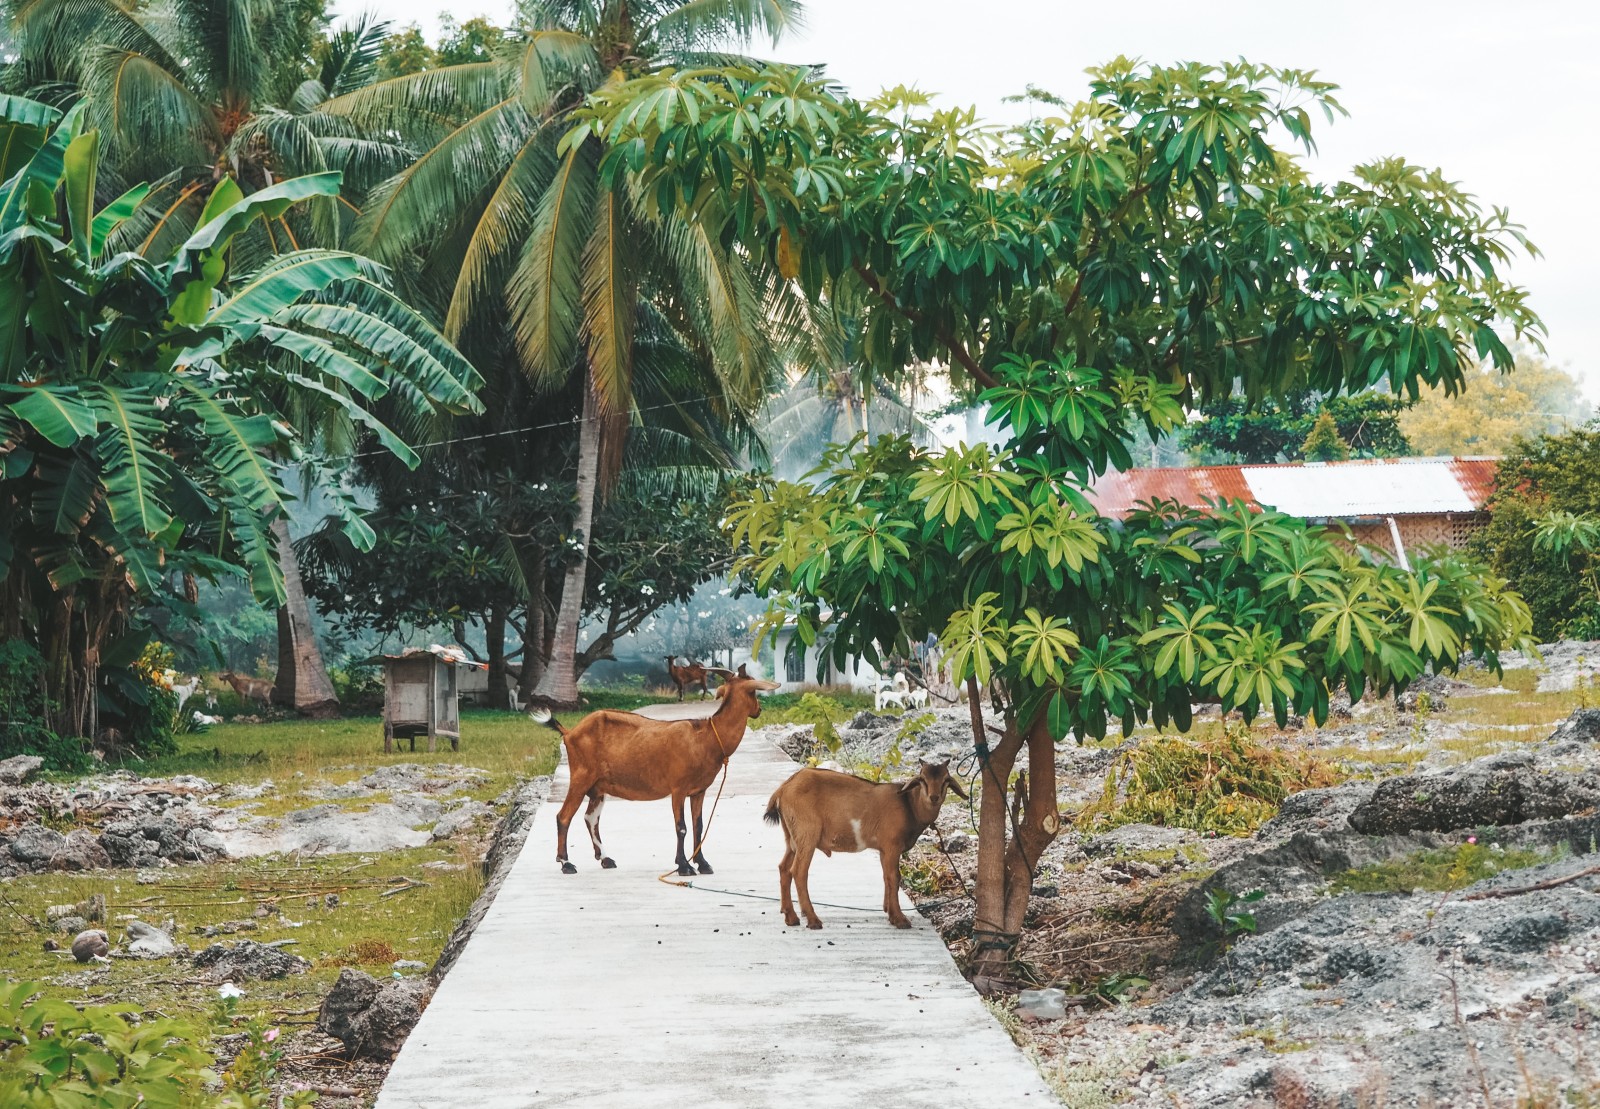 Goats on the Pamilacan island